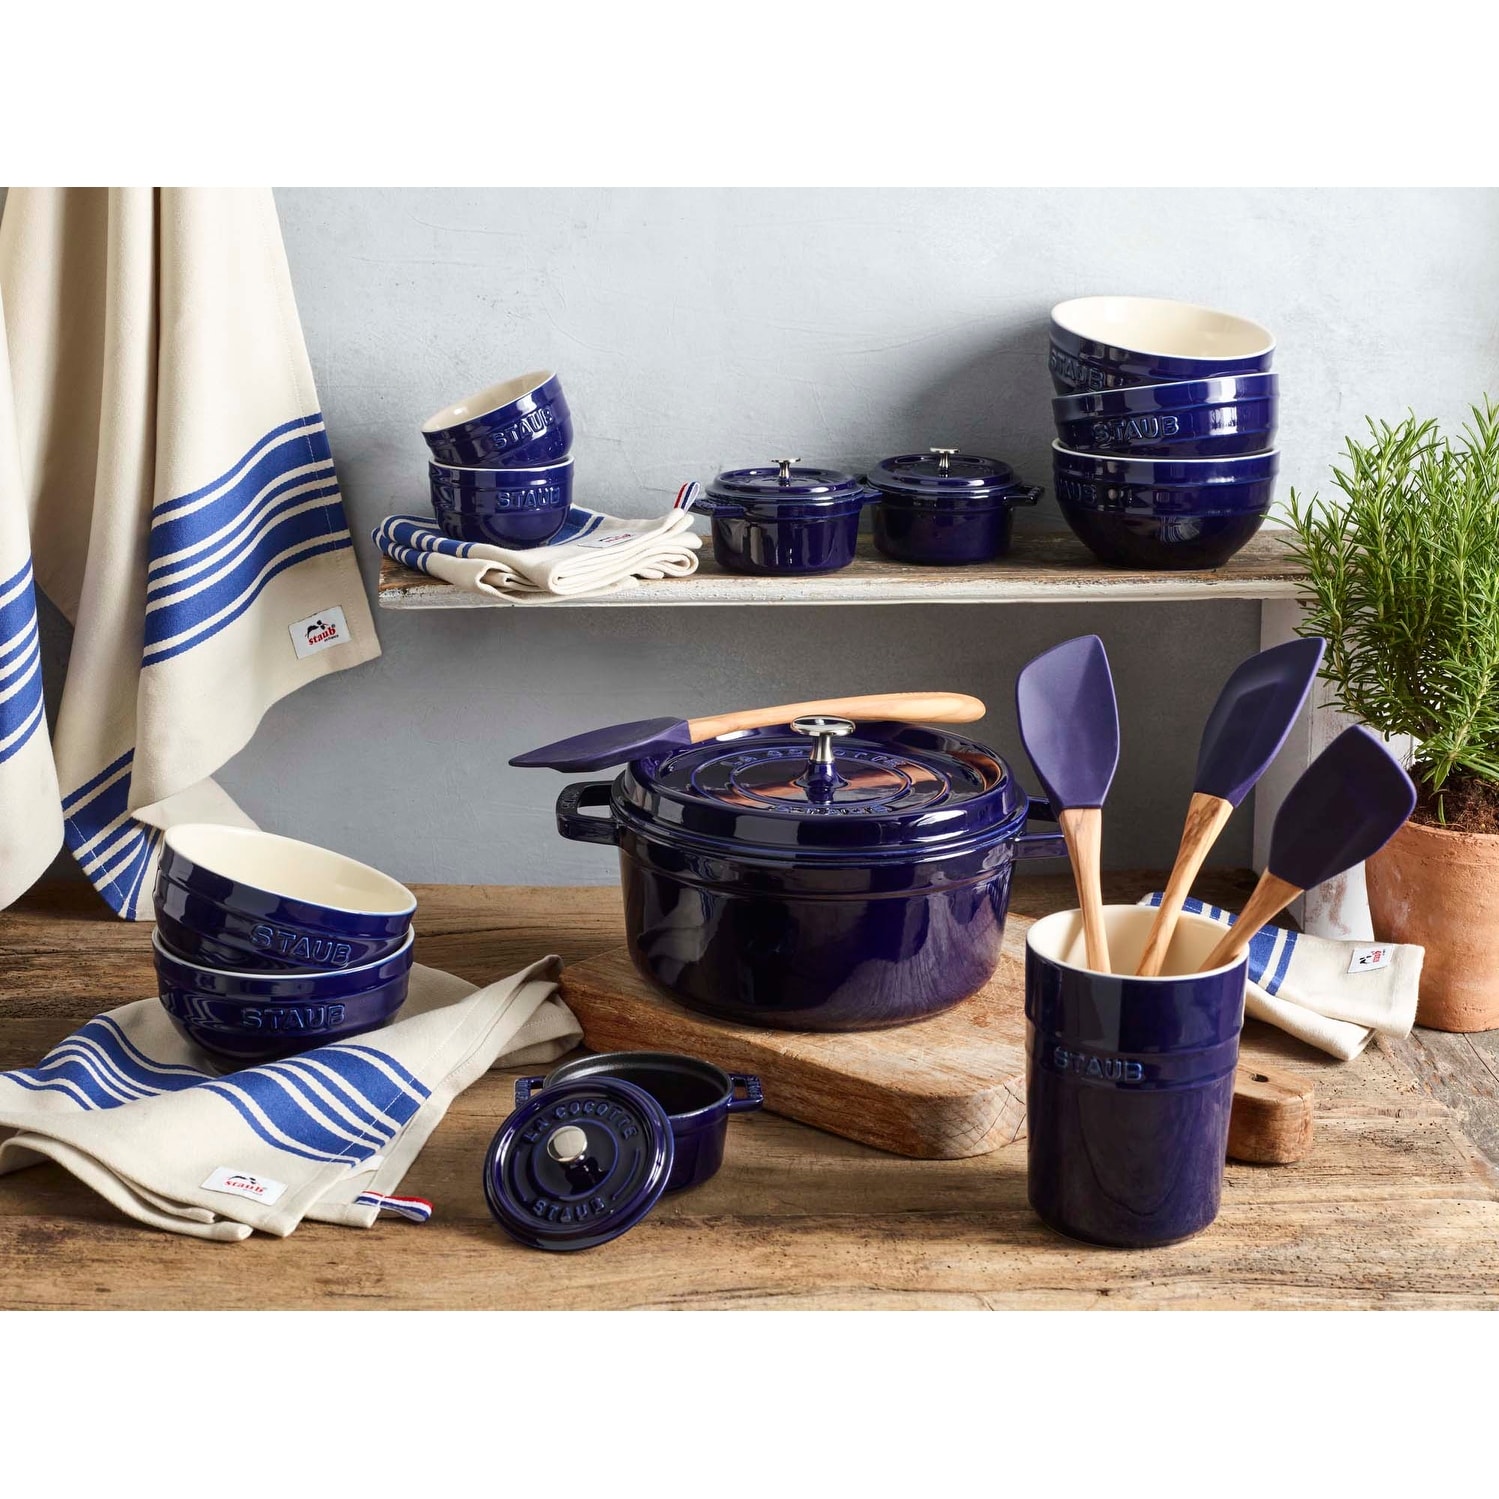 https://ak1.ostkcdn.com/images/products/is/images/direct/7ef46277e9d36520a54a47b2bcdf79a3bcd763e4/Staub-Ceramic-3-pc-Mini-Round-Cocotte-Set.jpg